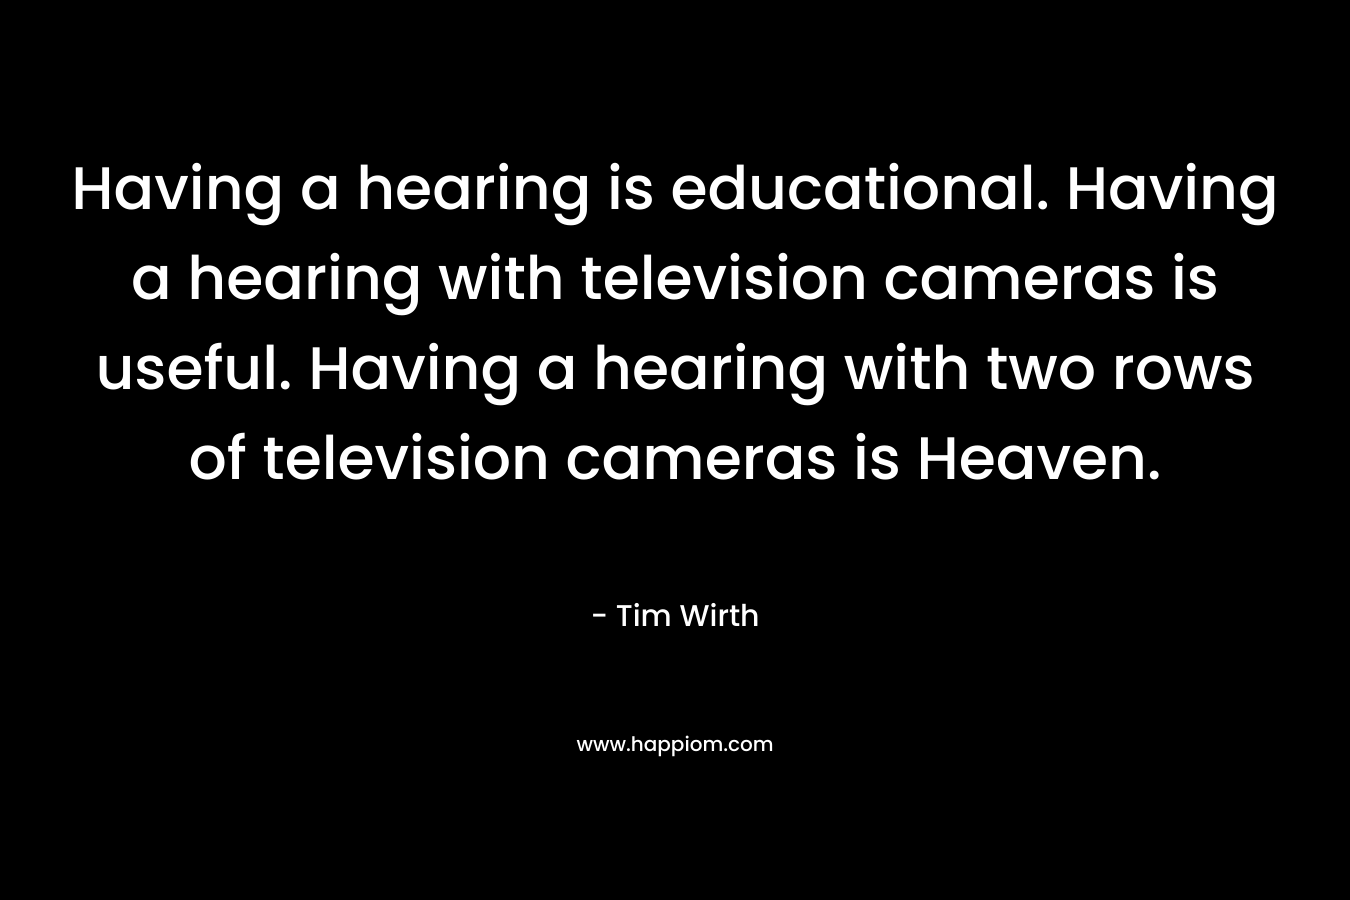 Having a hearing is educational. Having a hearing with television cameras is useful. Having a hearing with two rows of television cameras is Heaven.